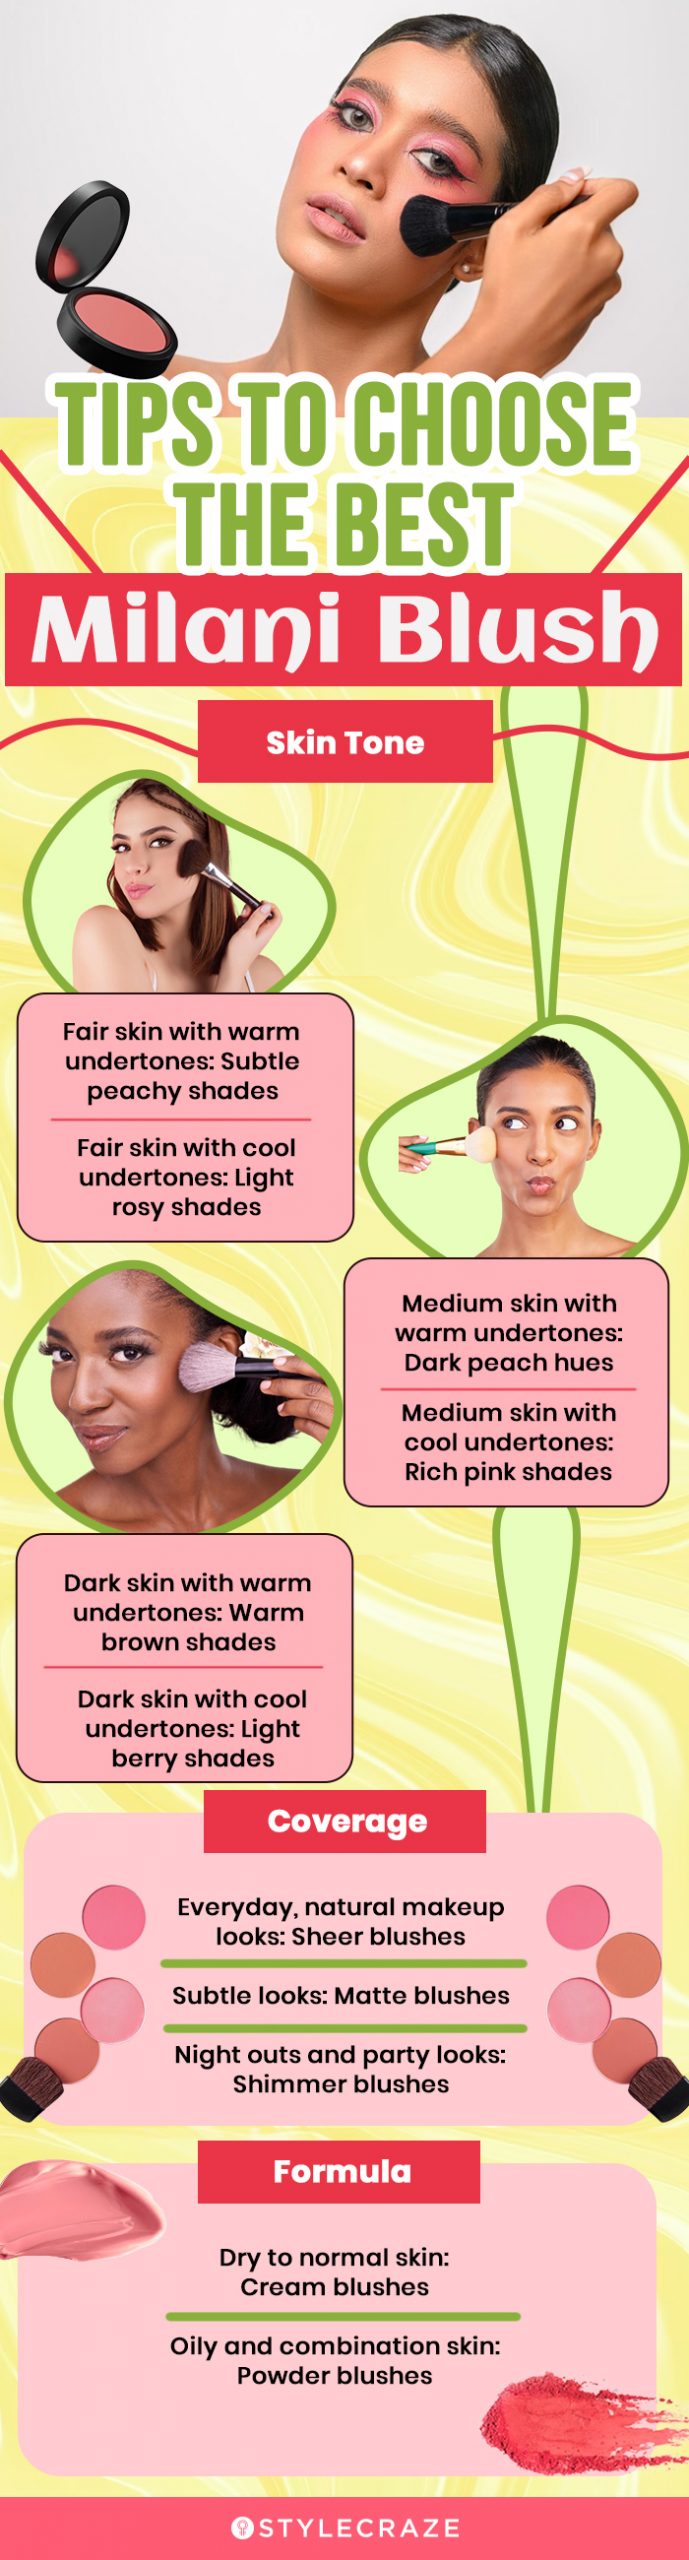 Tips To Choose The Best Milani Blush (infographic)